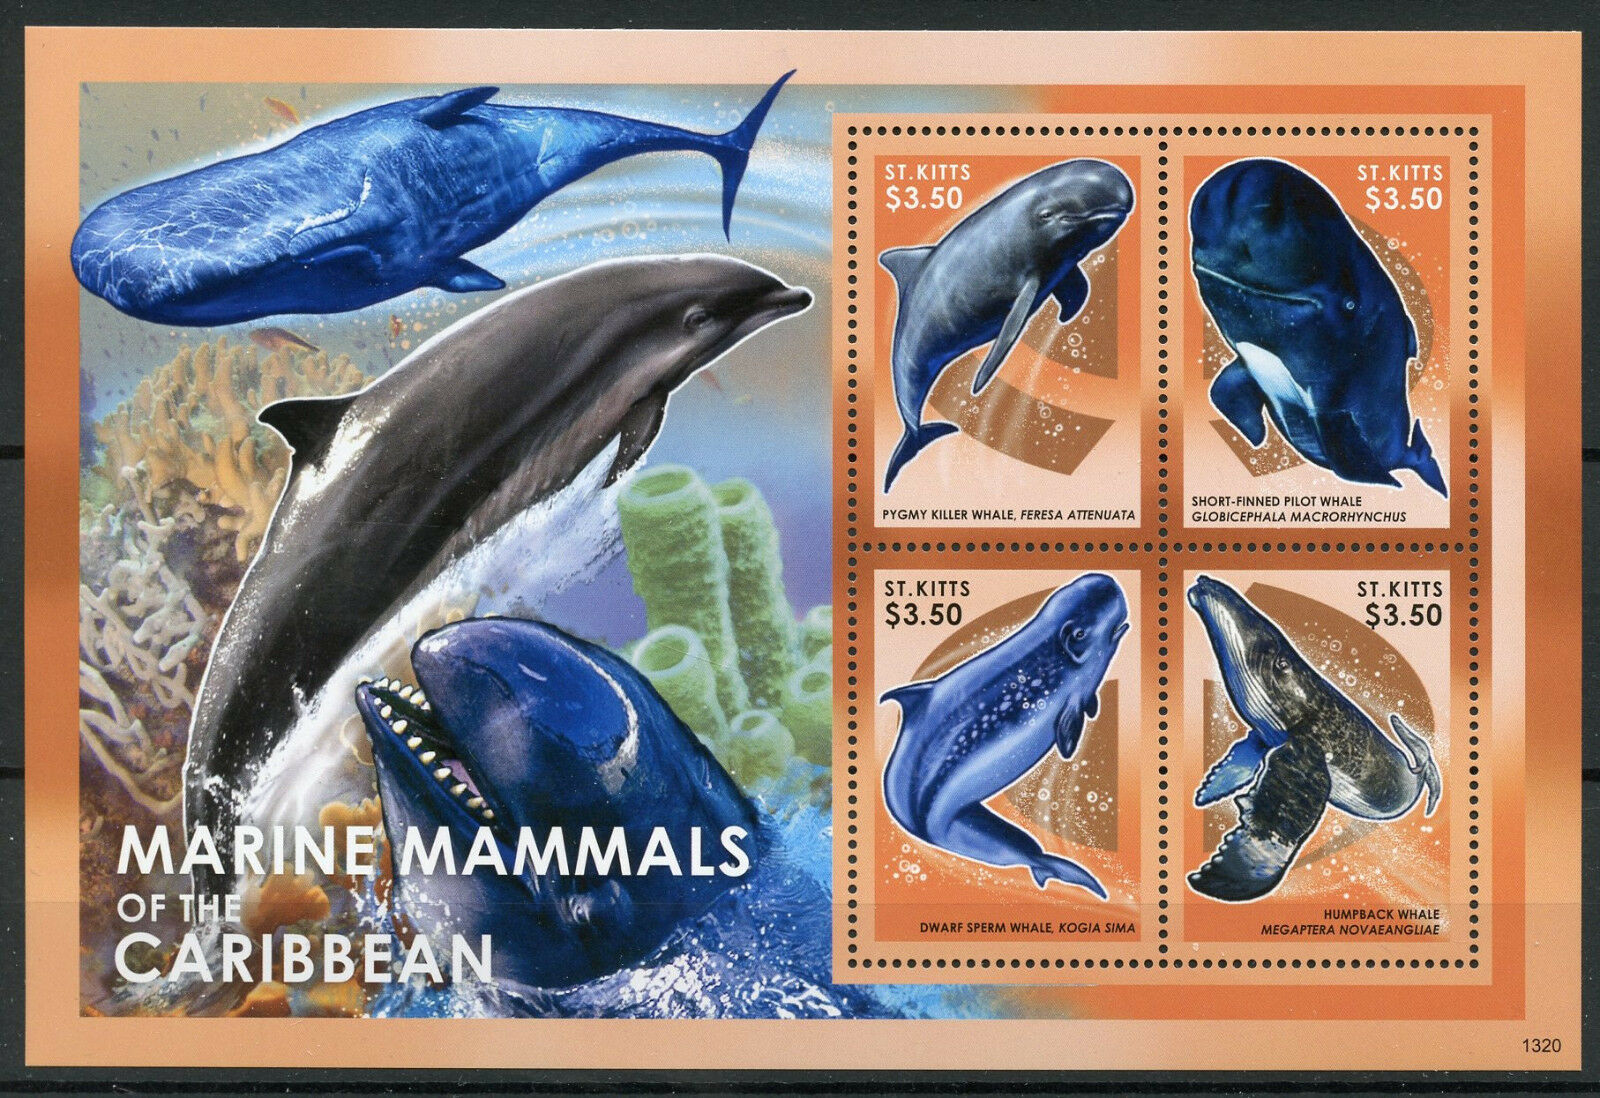 St Kitts 2013 MNH Marine Mammals of Caribbean Sperm Whale 4v M/S Whales Stamps